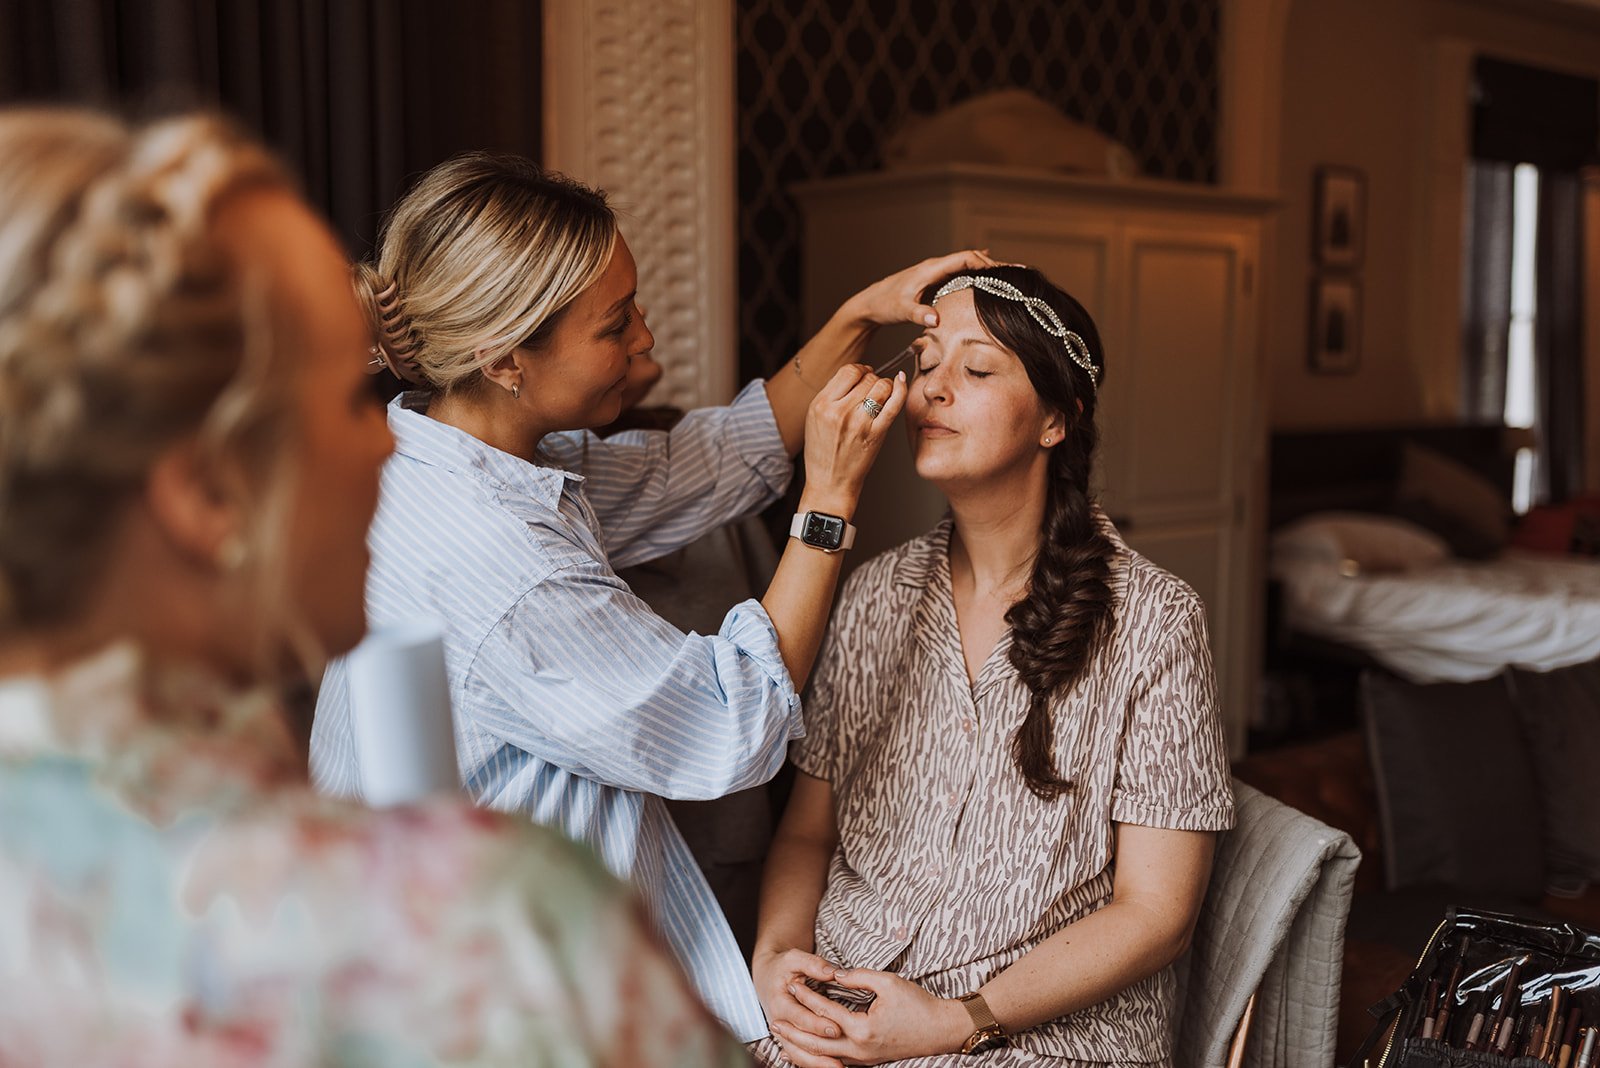 The bride in the make-up chair